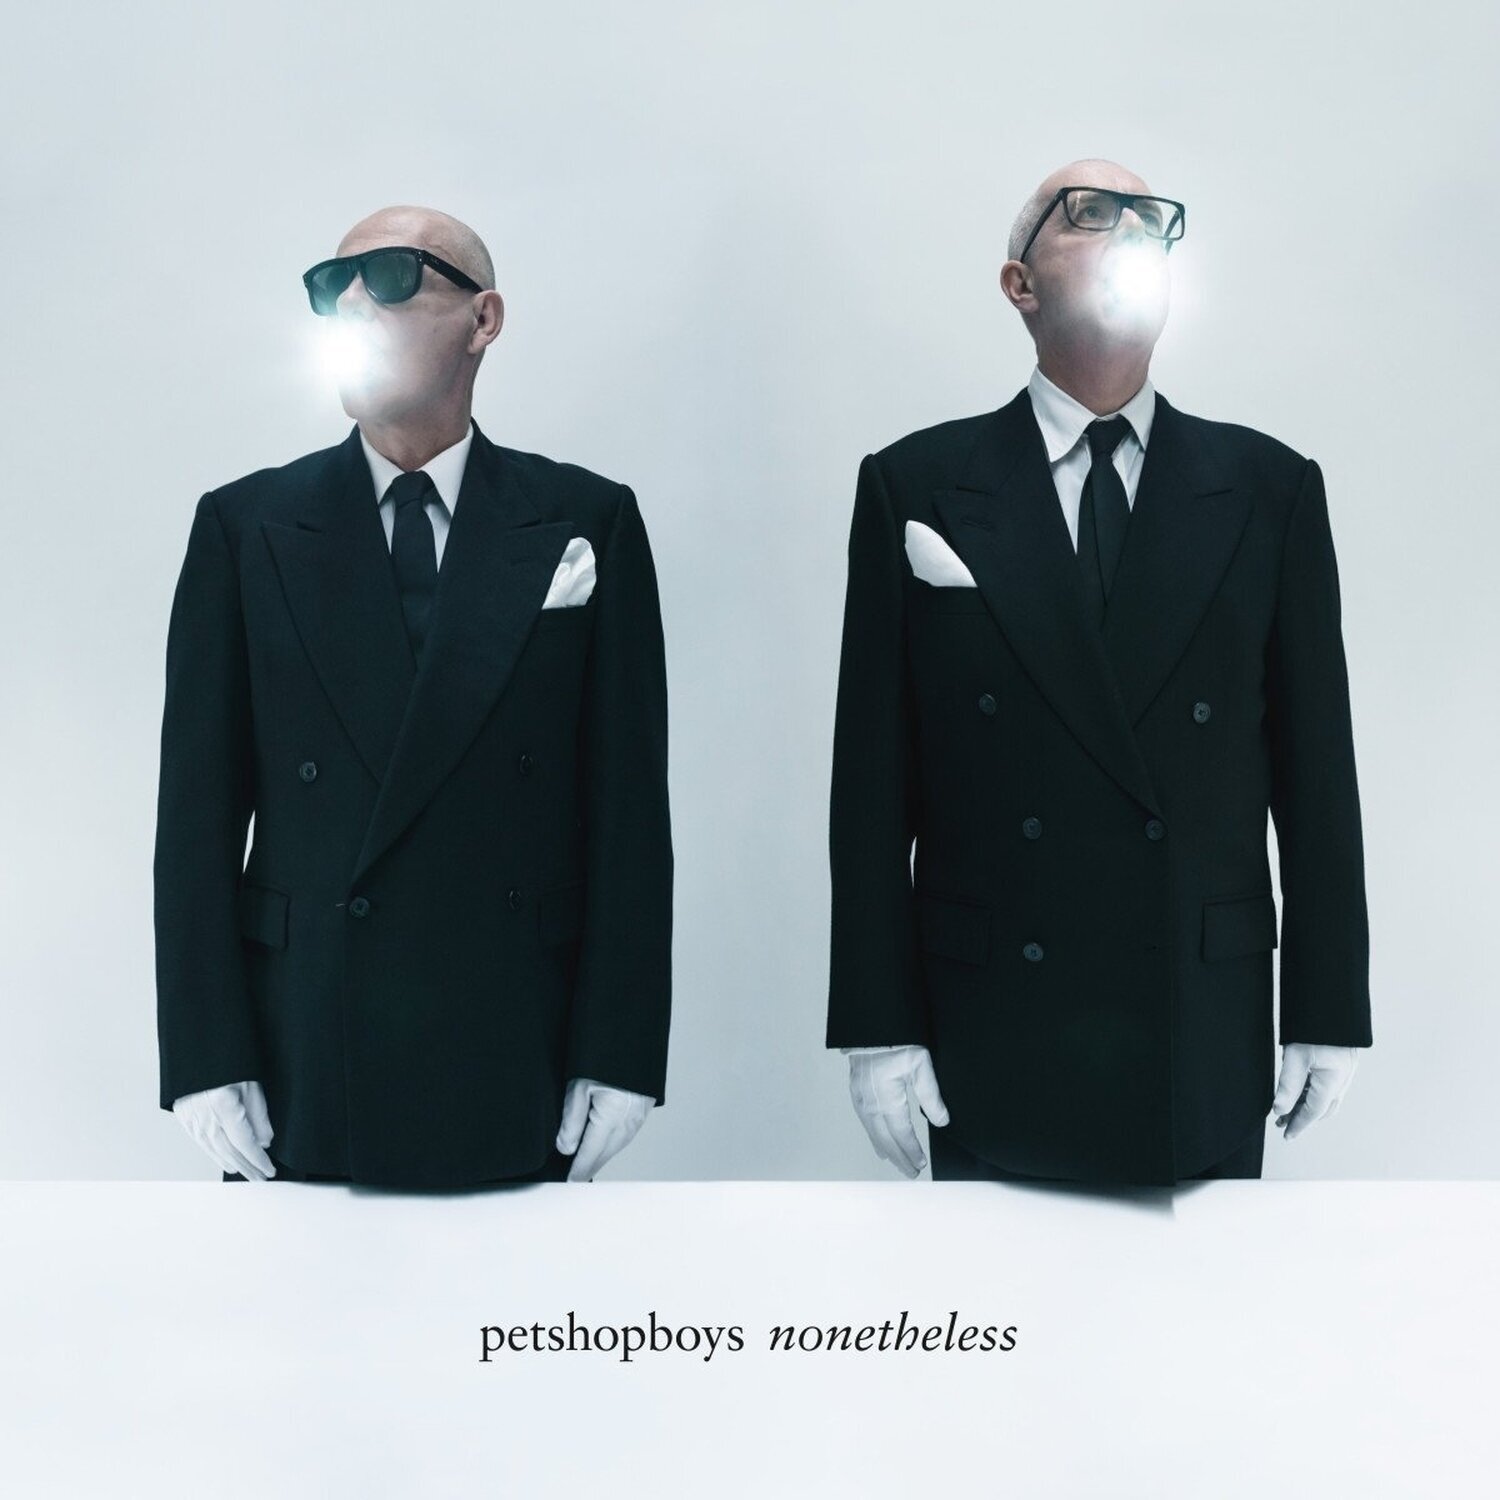 Pet Shop Boys - Nonetheless (Limited 2CD Wallet) (2 CD)